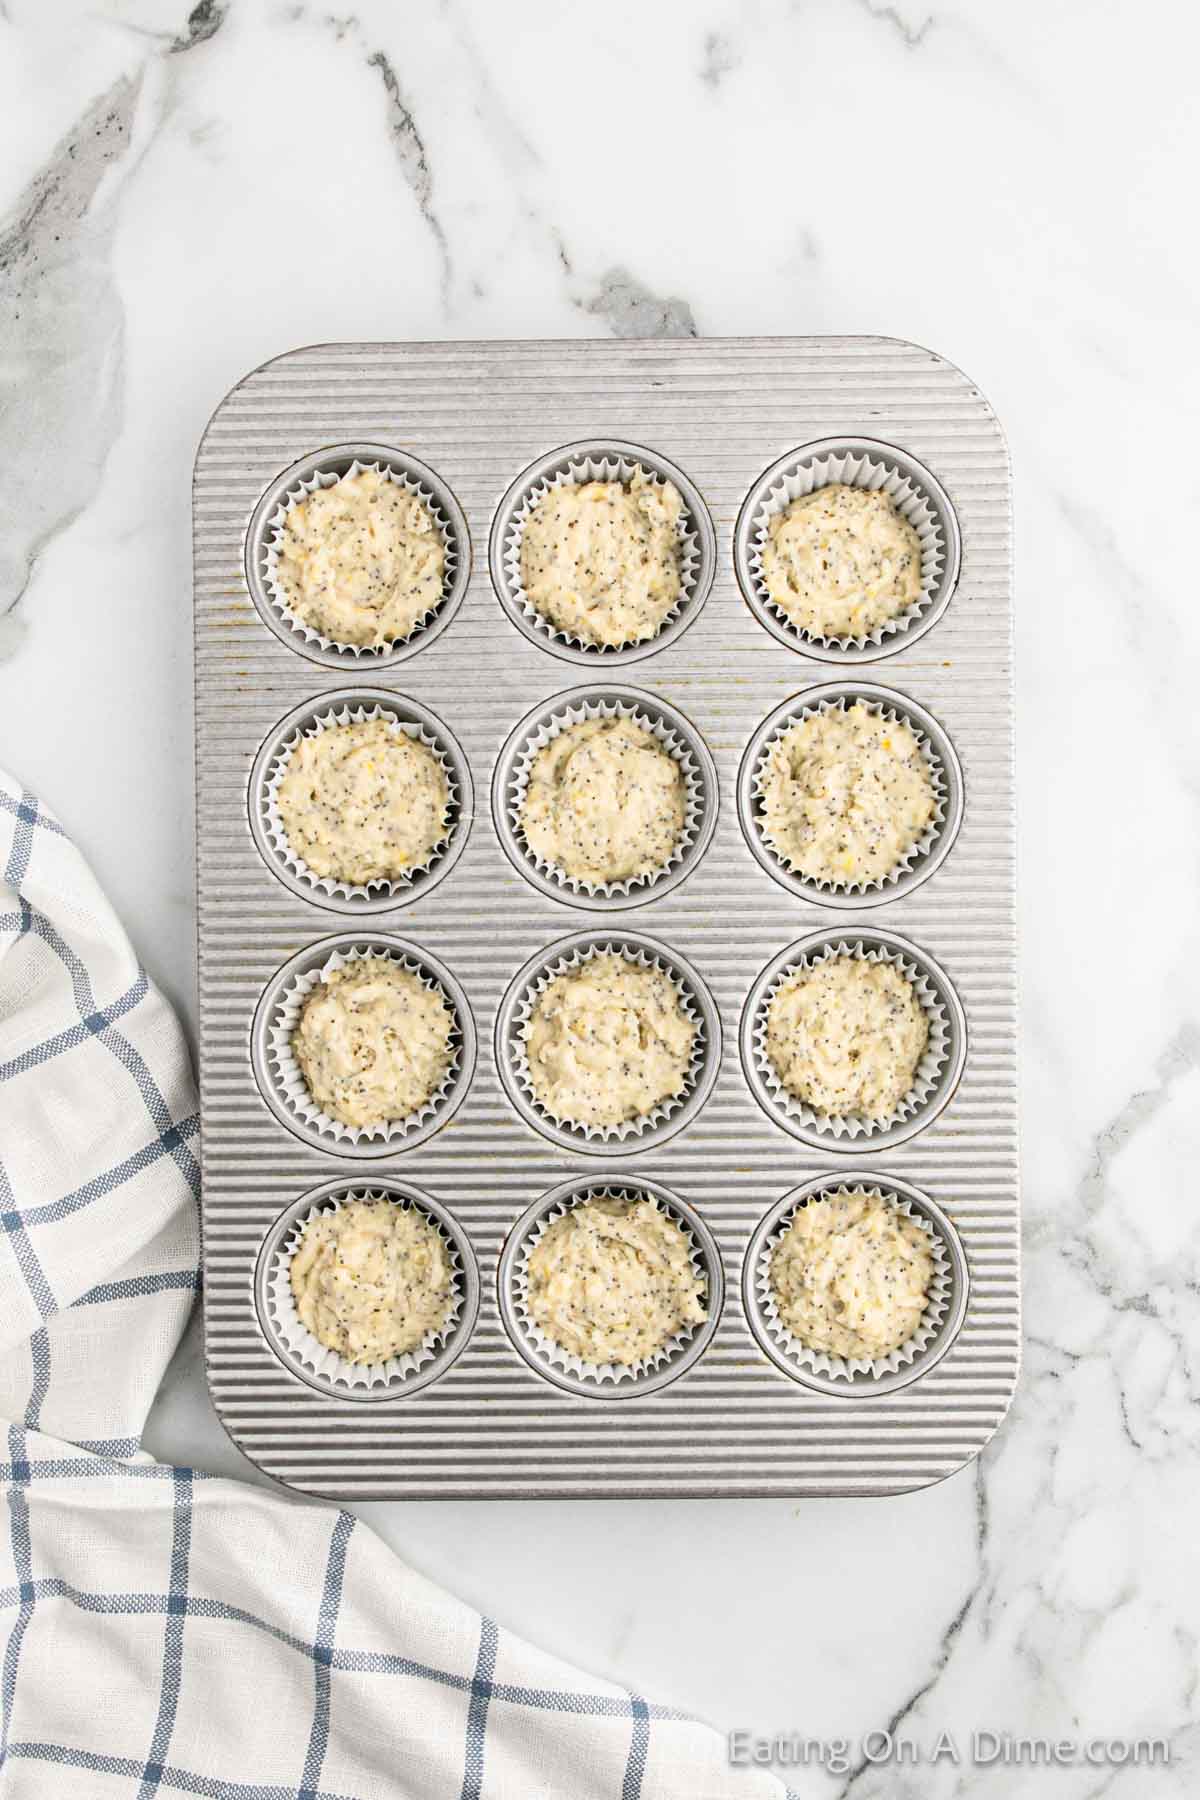 Fill the cupcake batter in the muffin pan